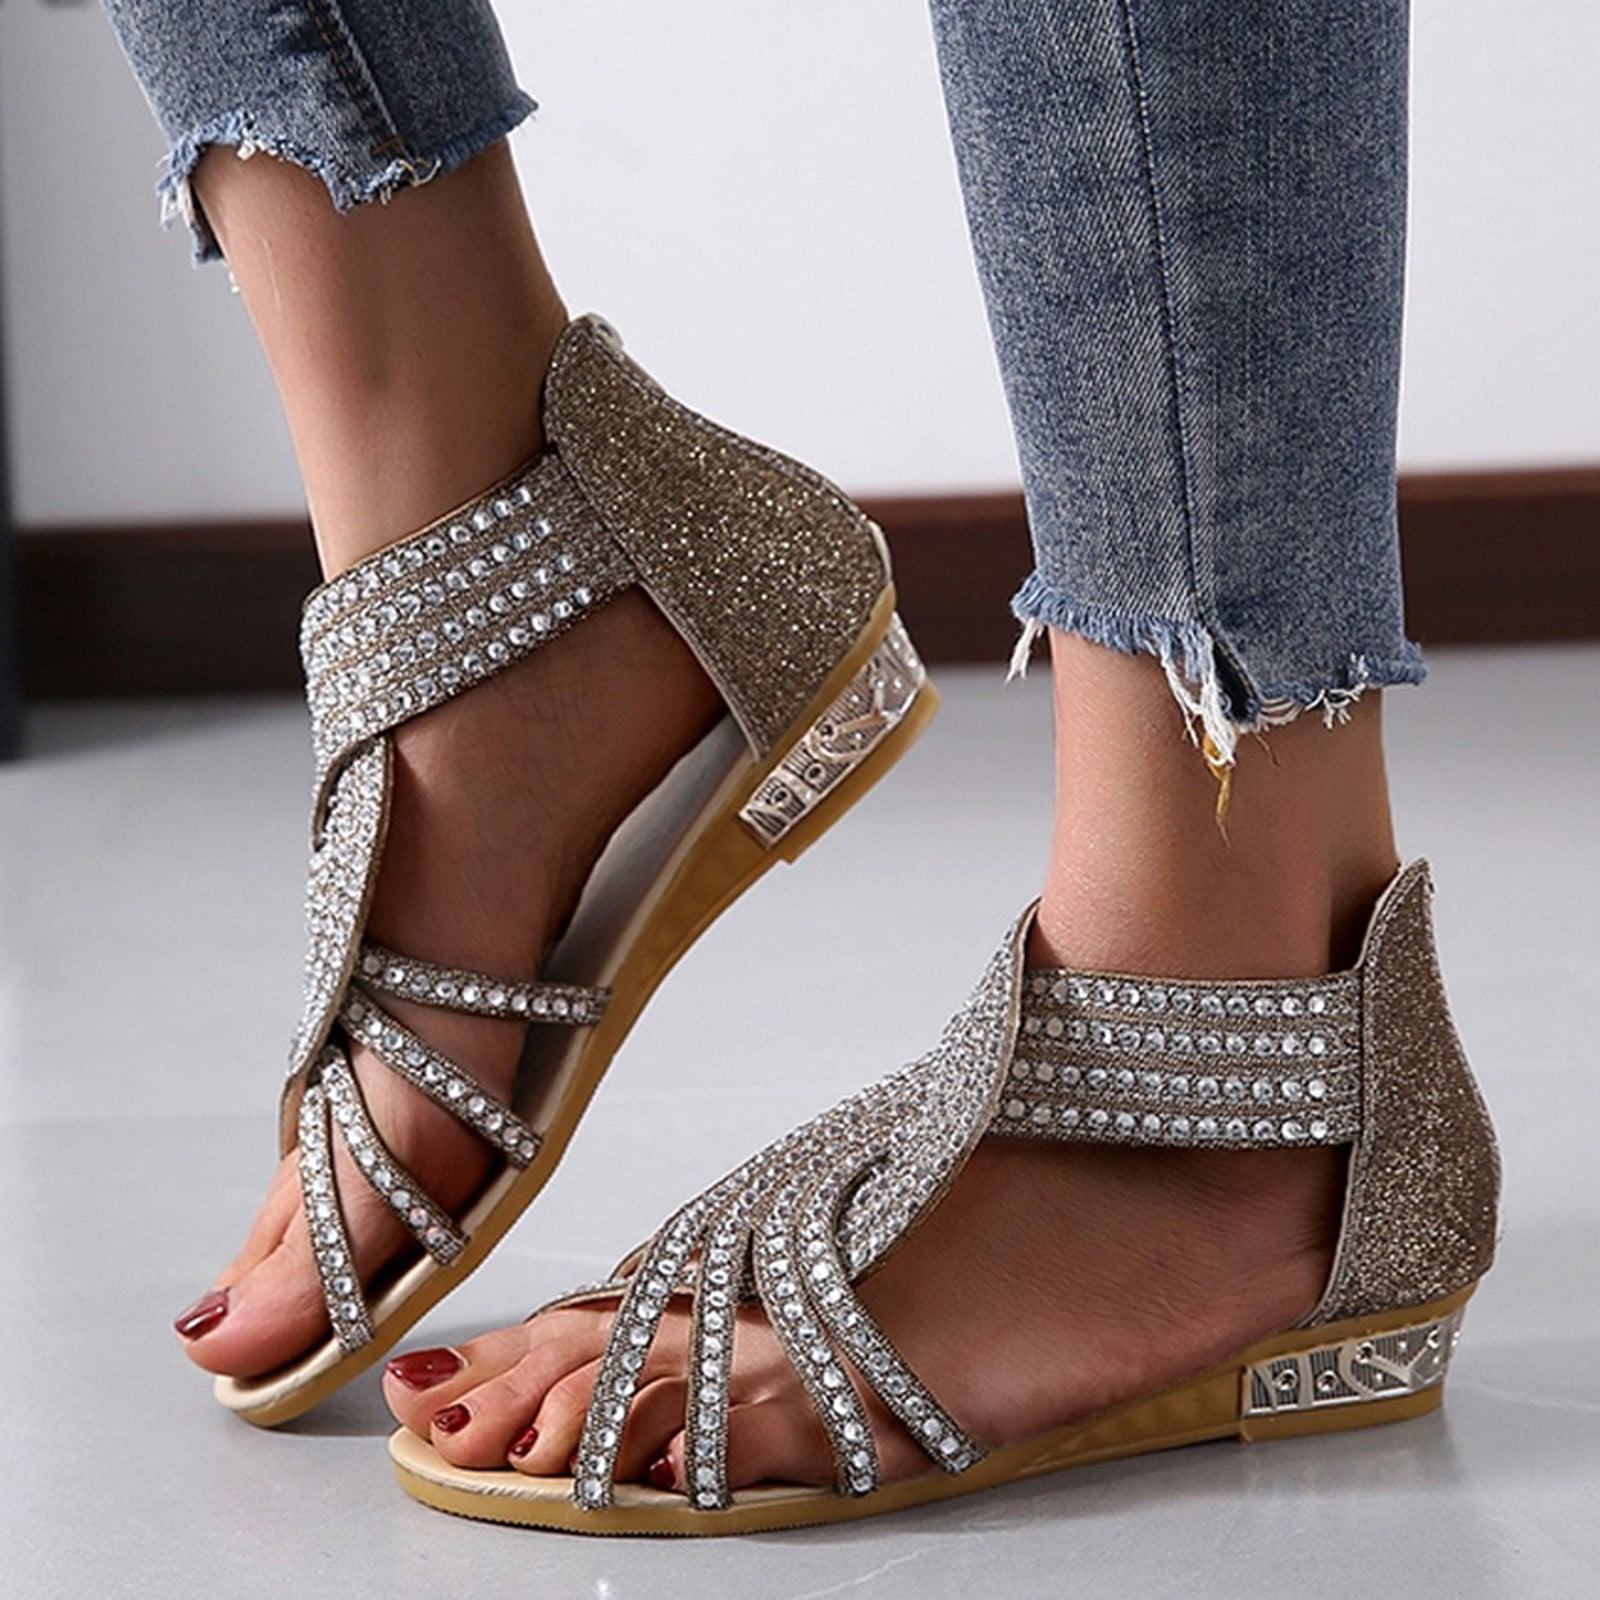 CAICJ98 Womens Shoes Shoes for Women Sandals with Rhinestone